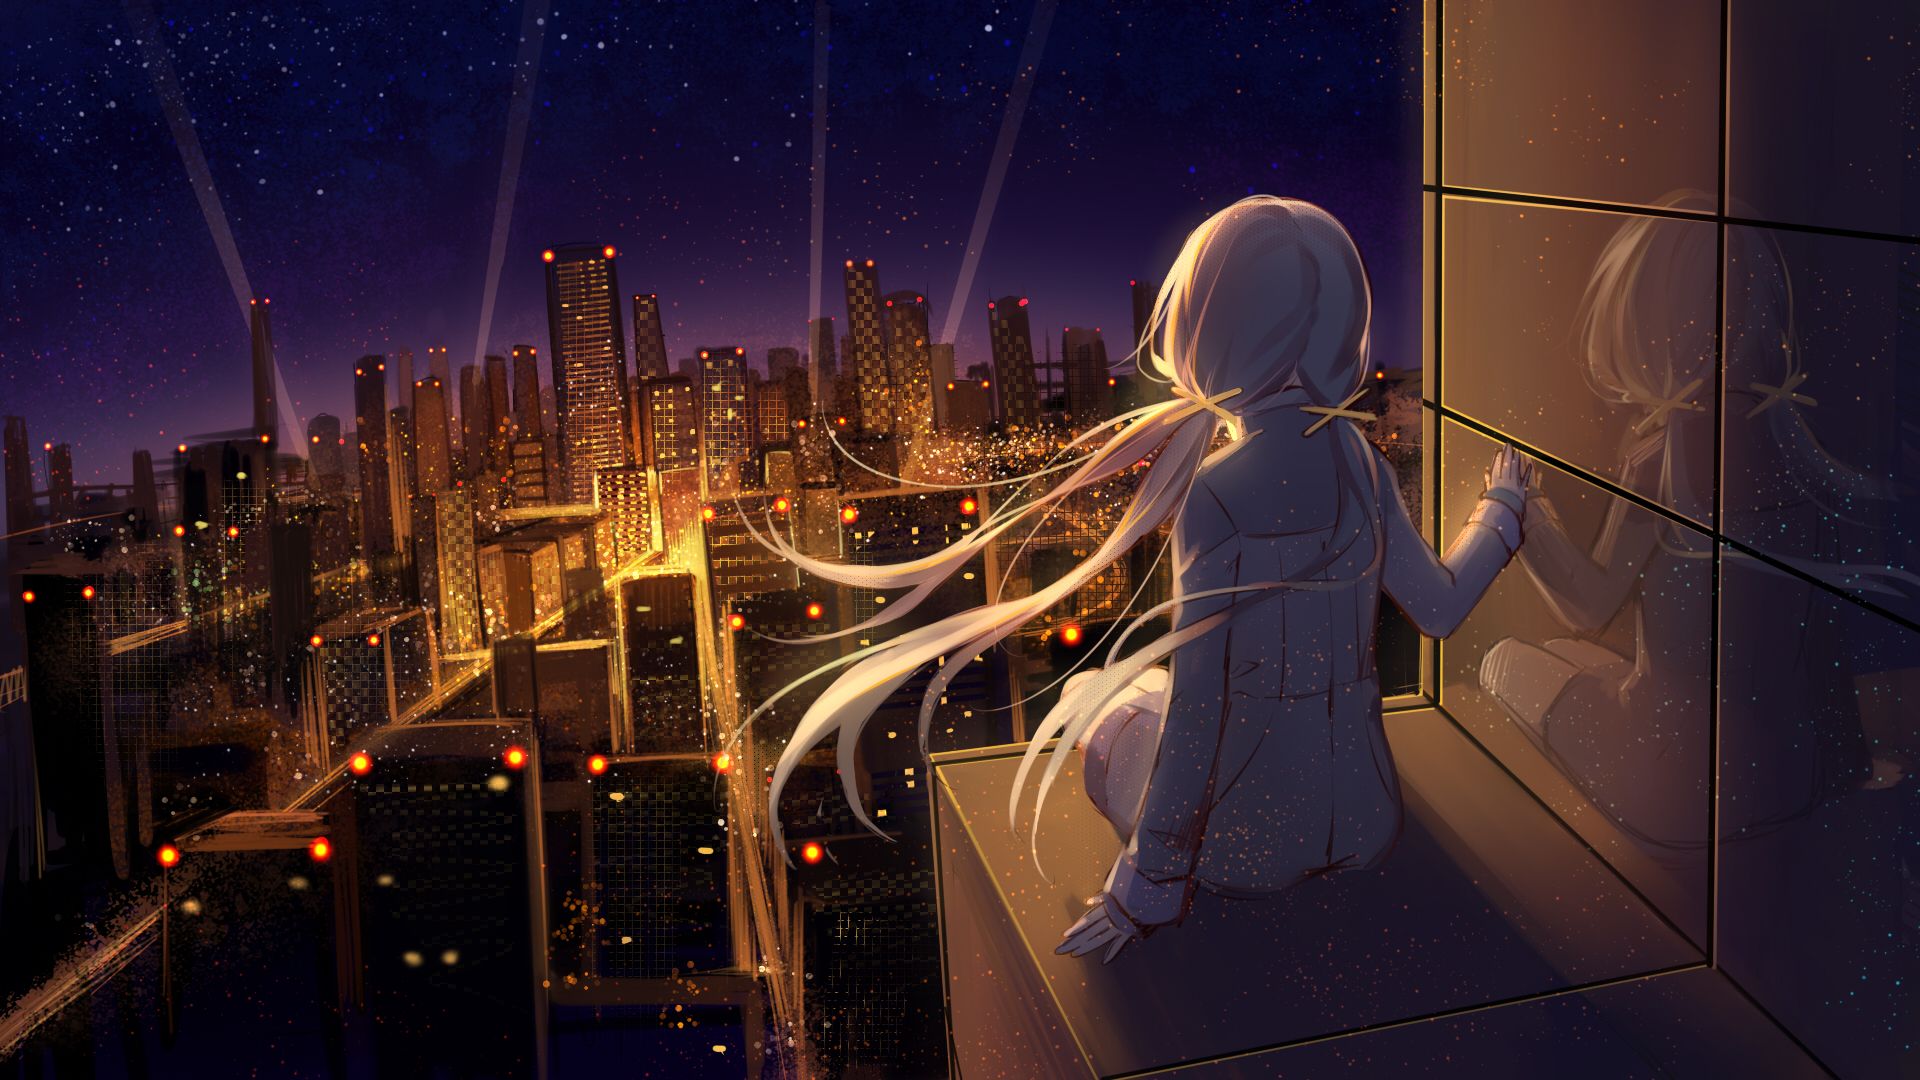 Anime Girl Looking at Stars Wallpaper, HD Anime 4K Wallpaper, Image, Photo and Background